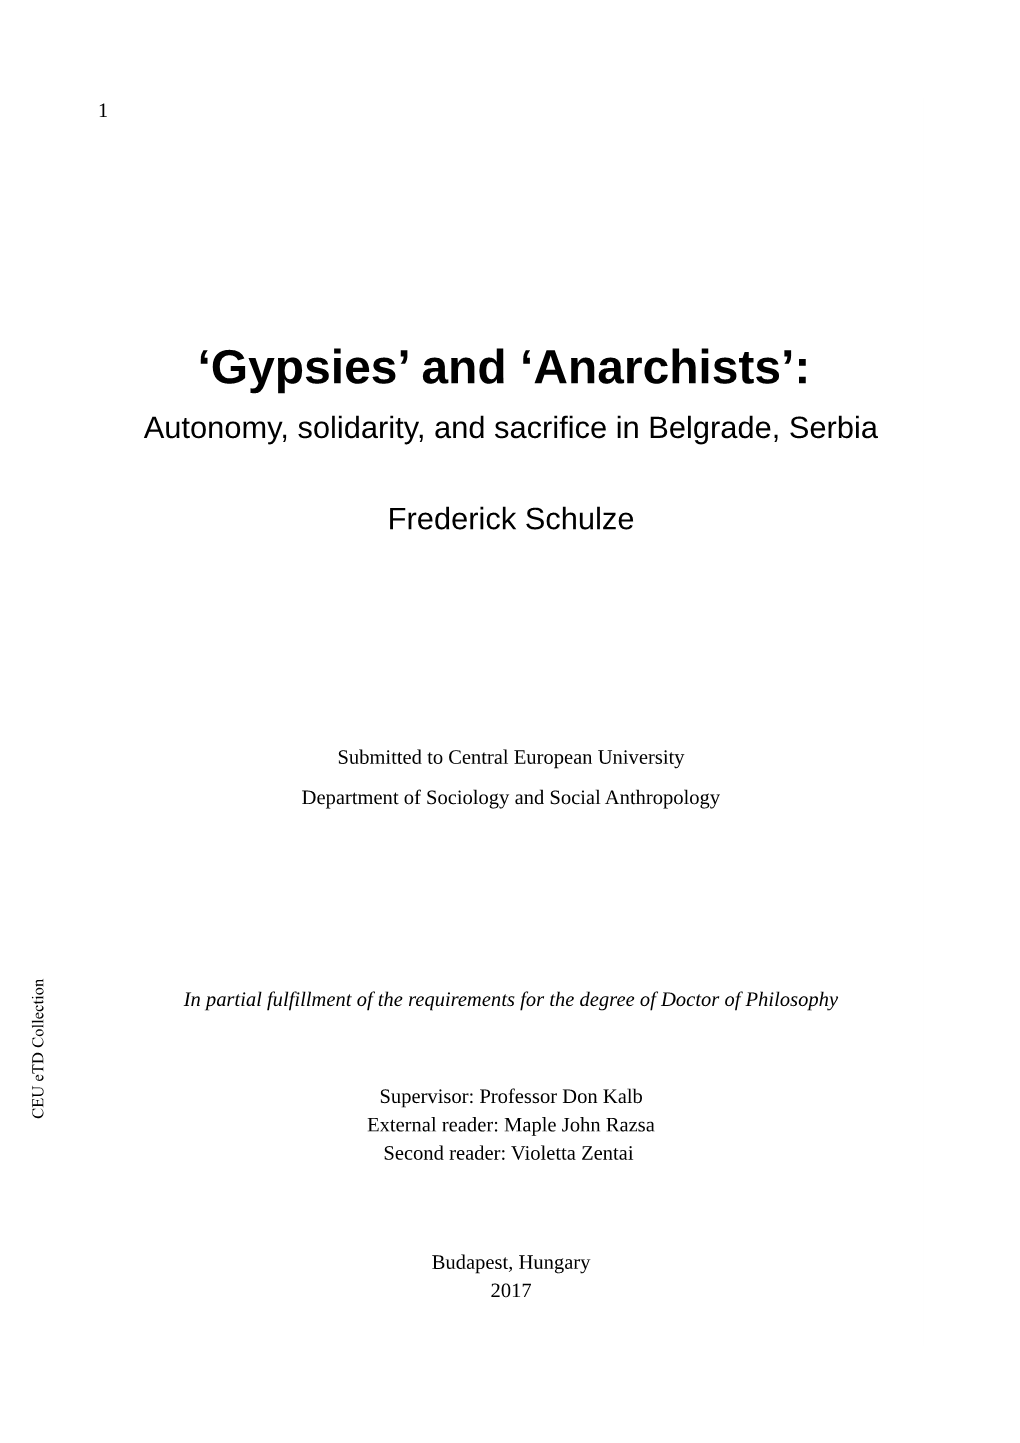 'Gypsies' and 'Anarchists'